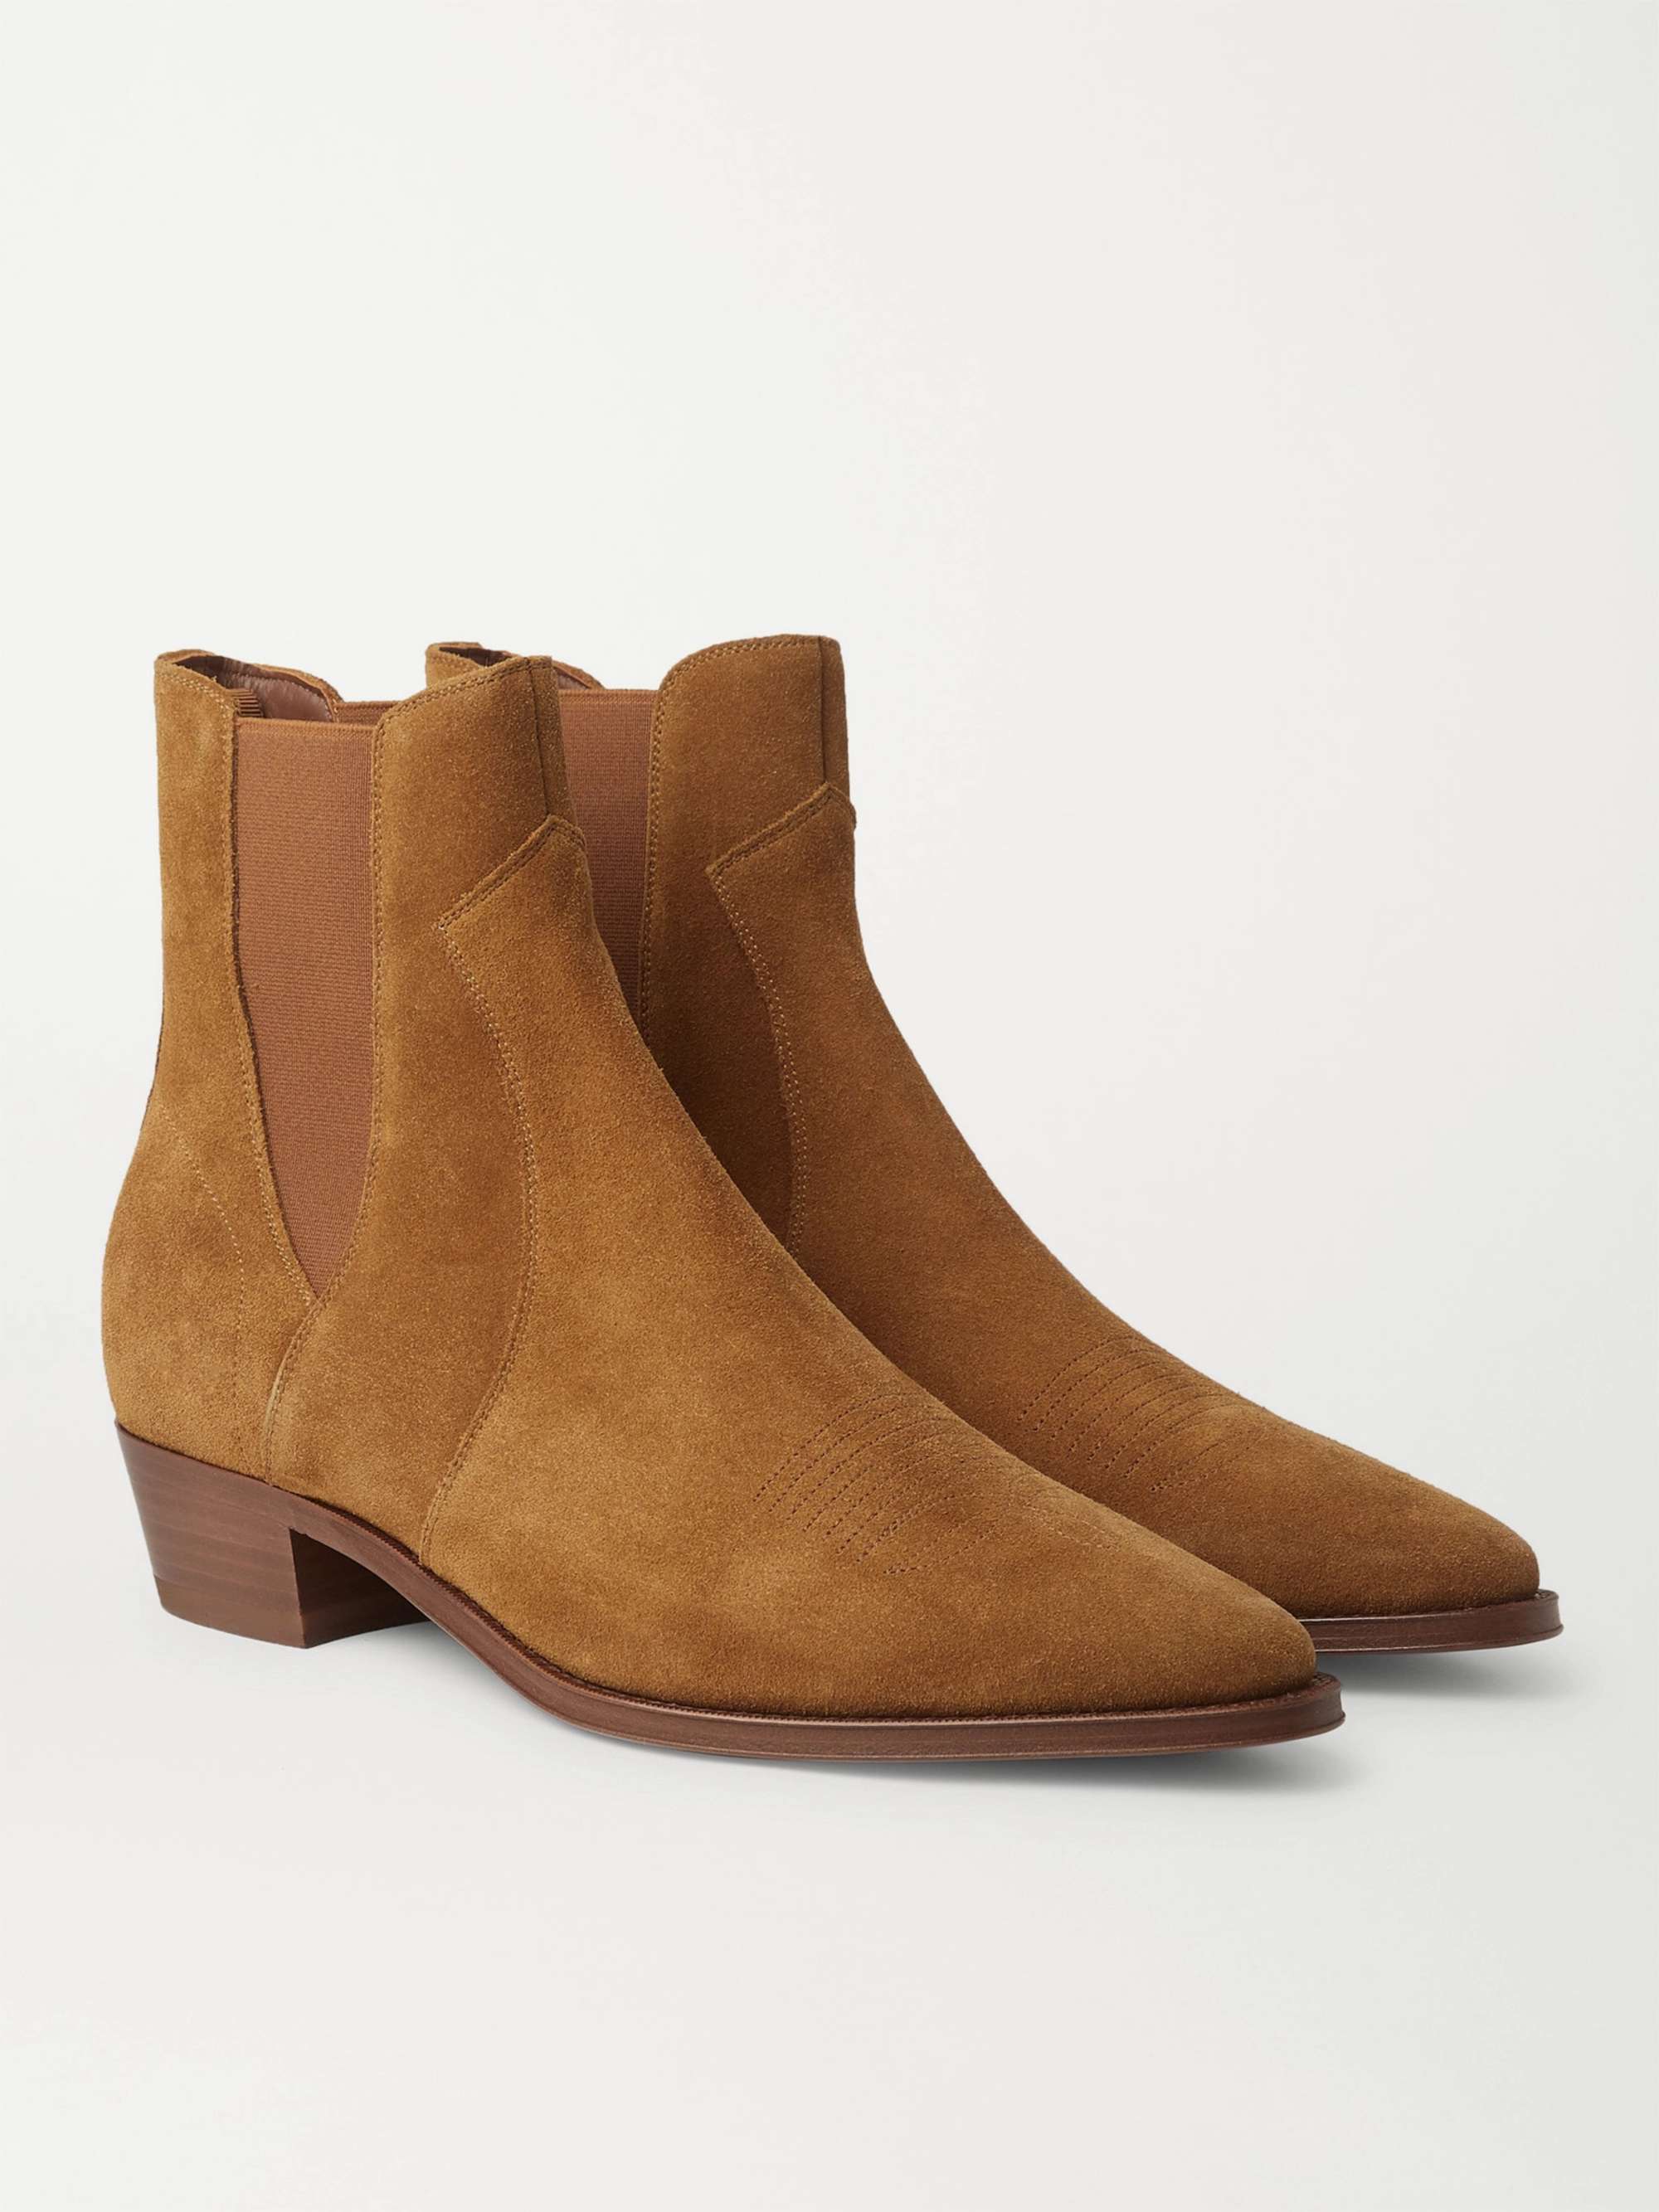 CELINE HOMME Suede Chelsea Boots